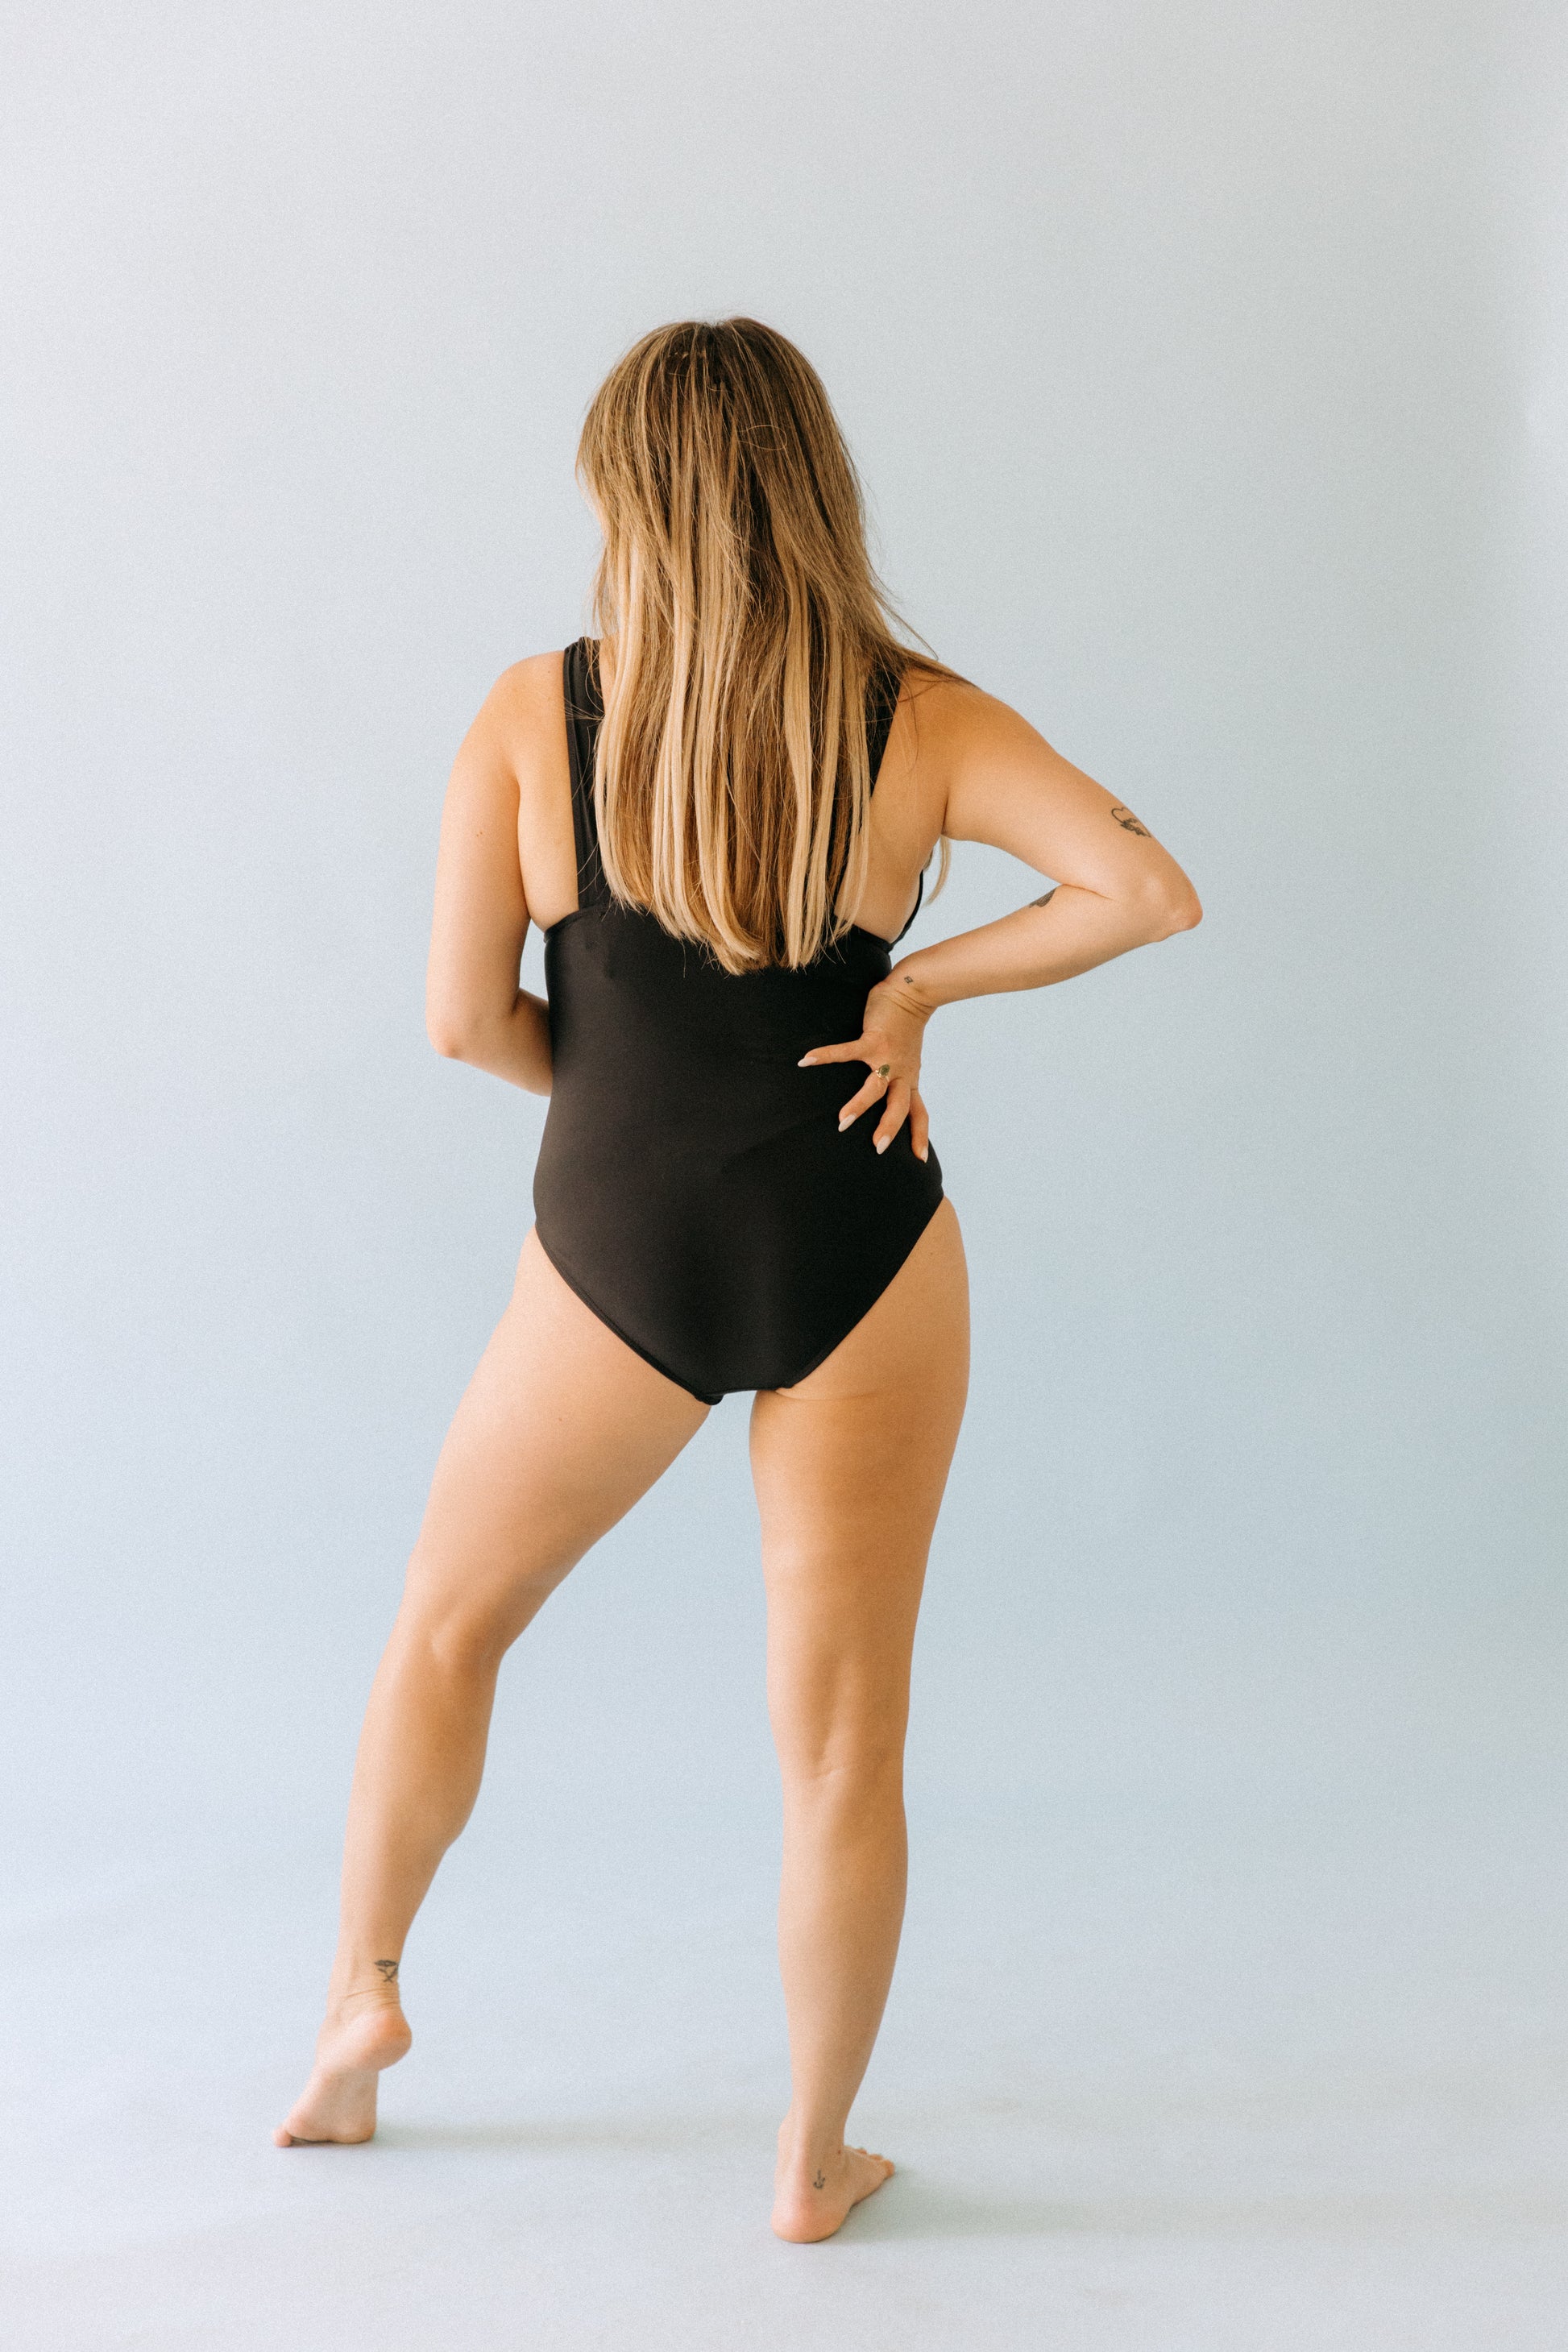 The Plunge One Piece – Analina